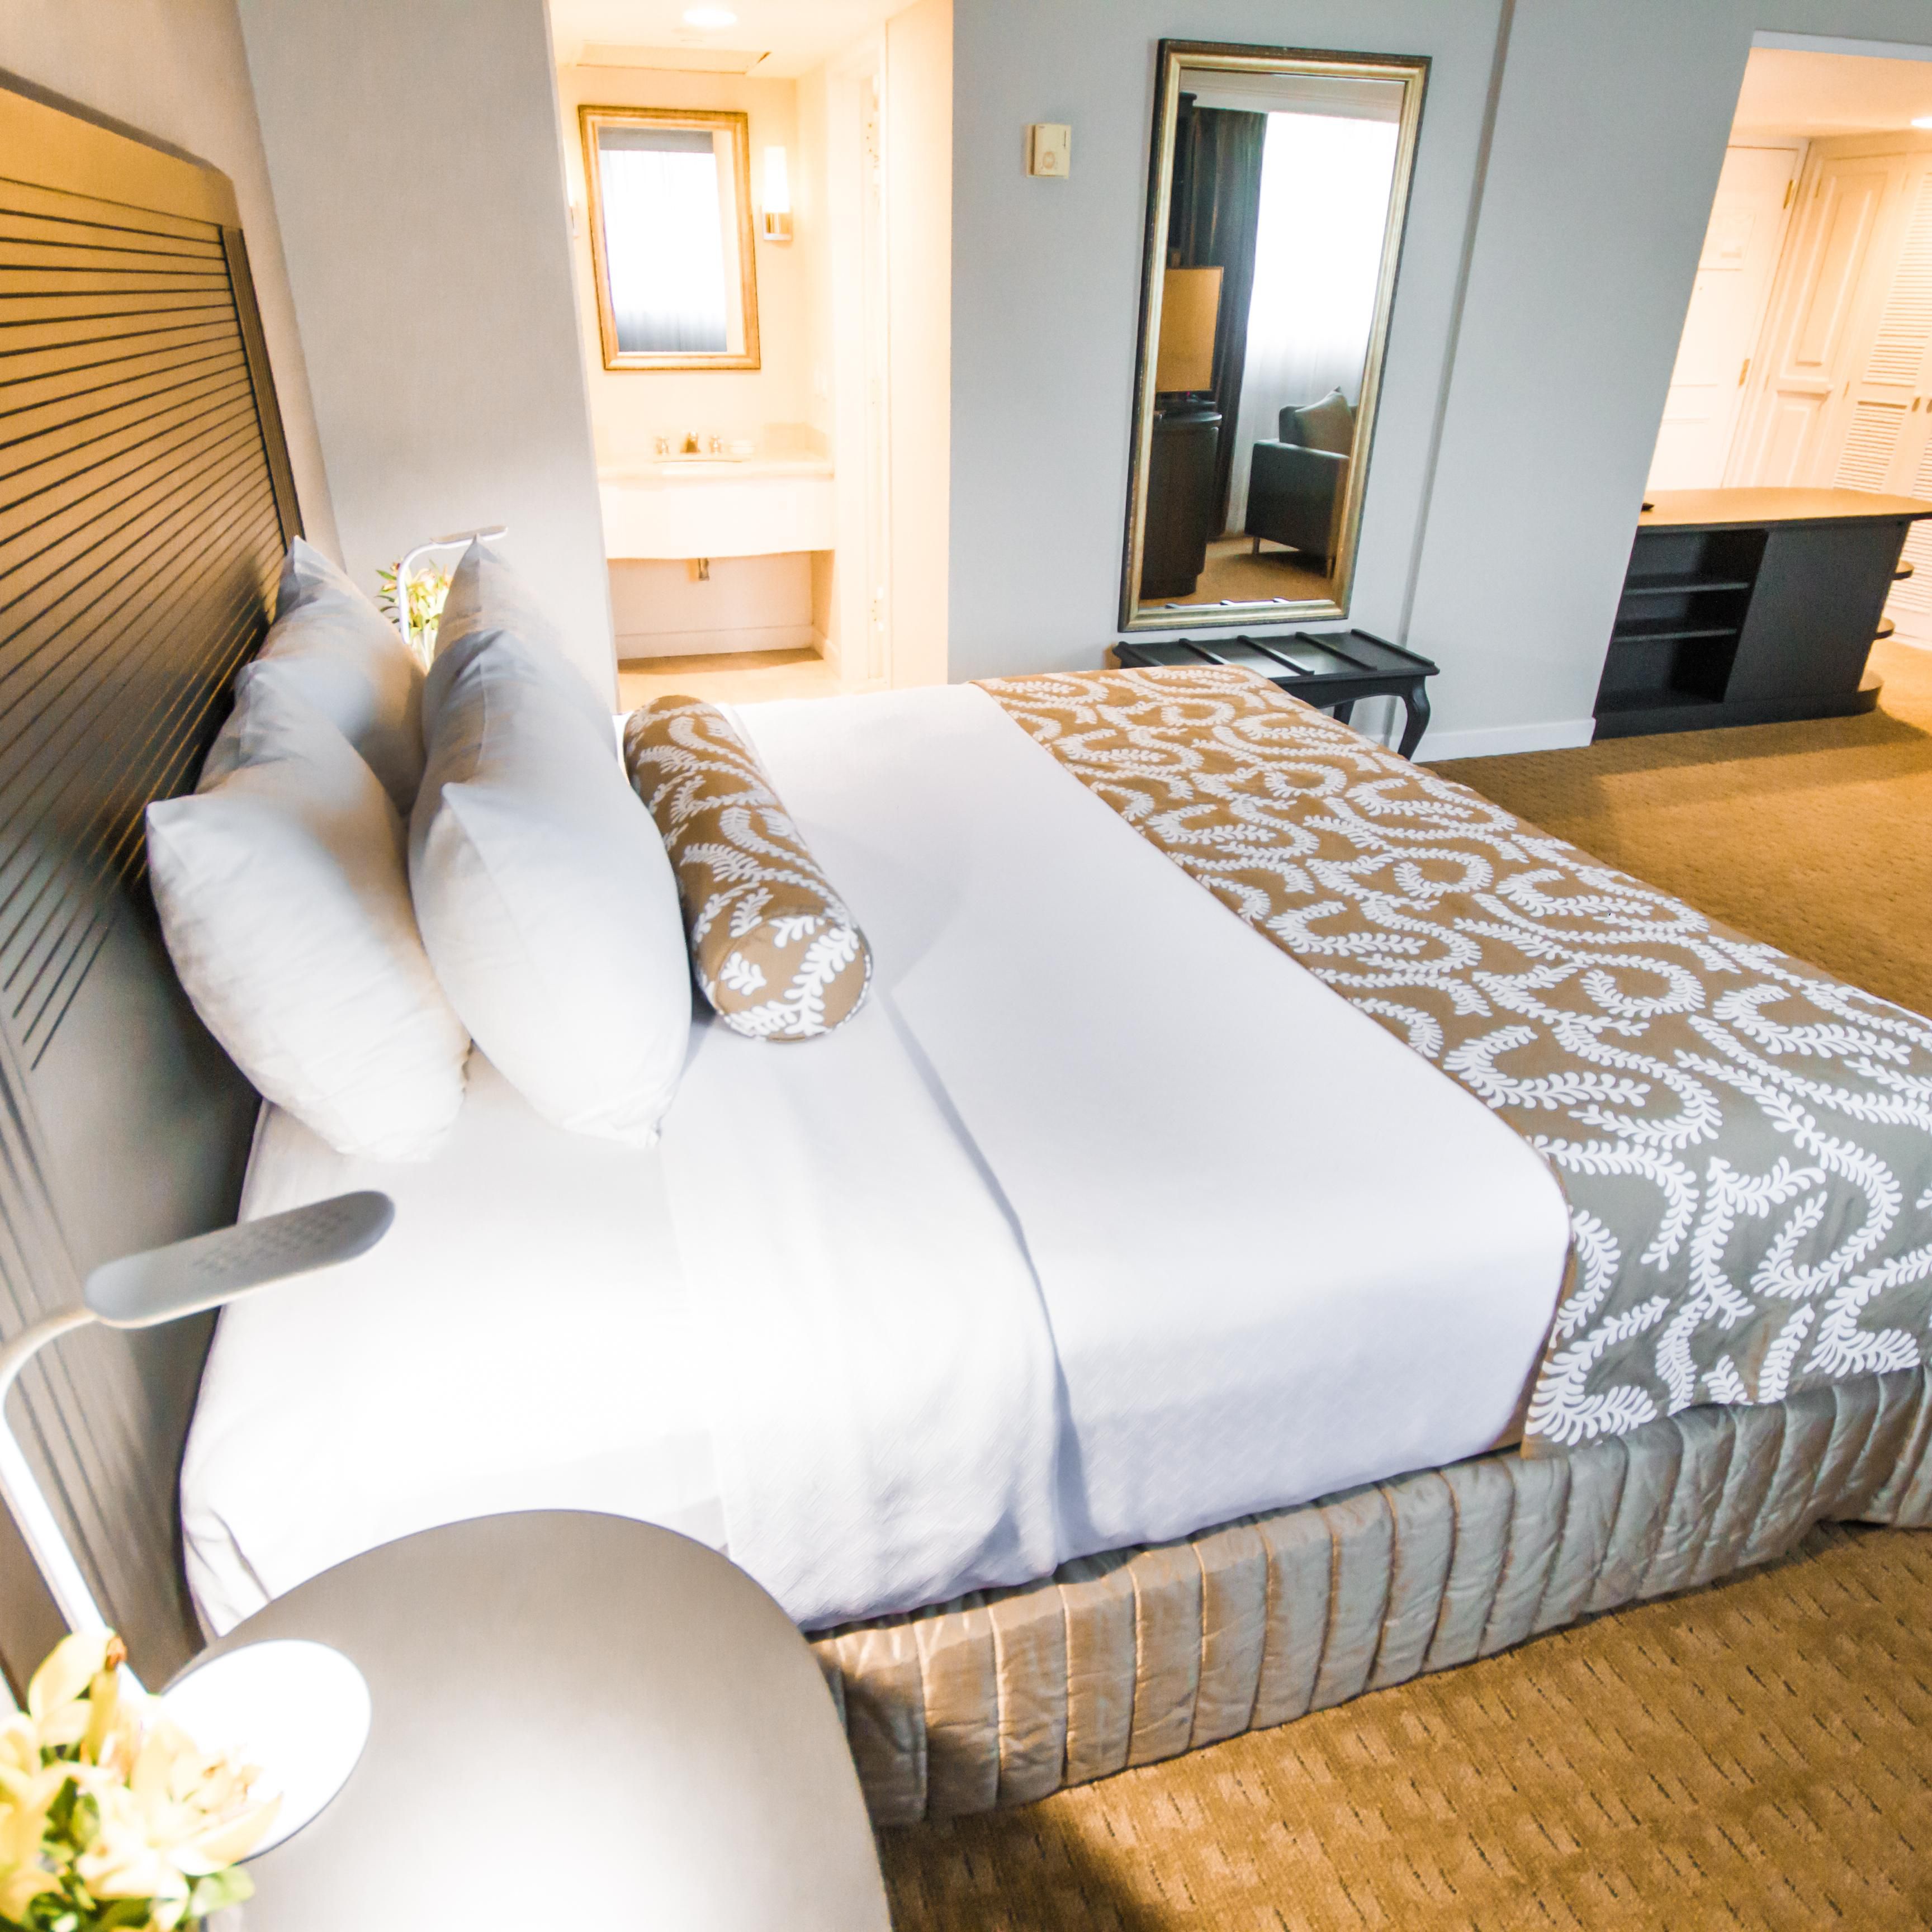 Rest assured in our king-sized bed suite.